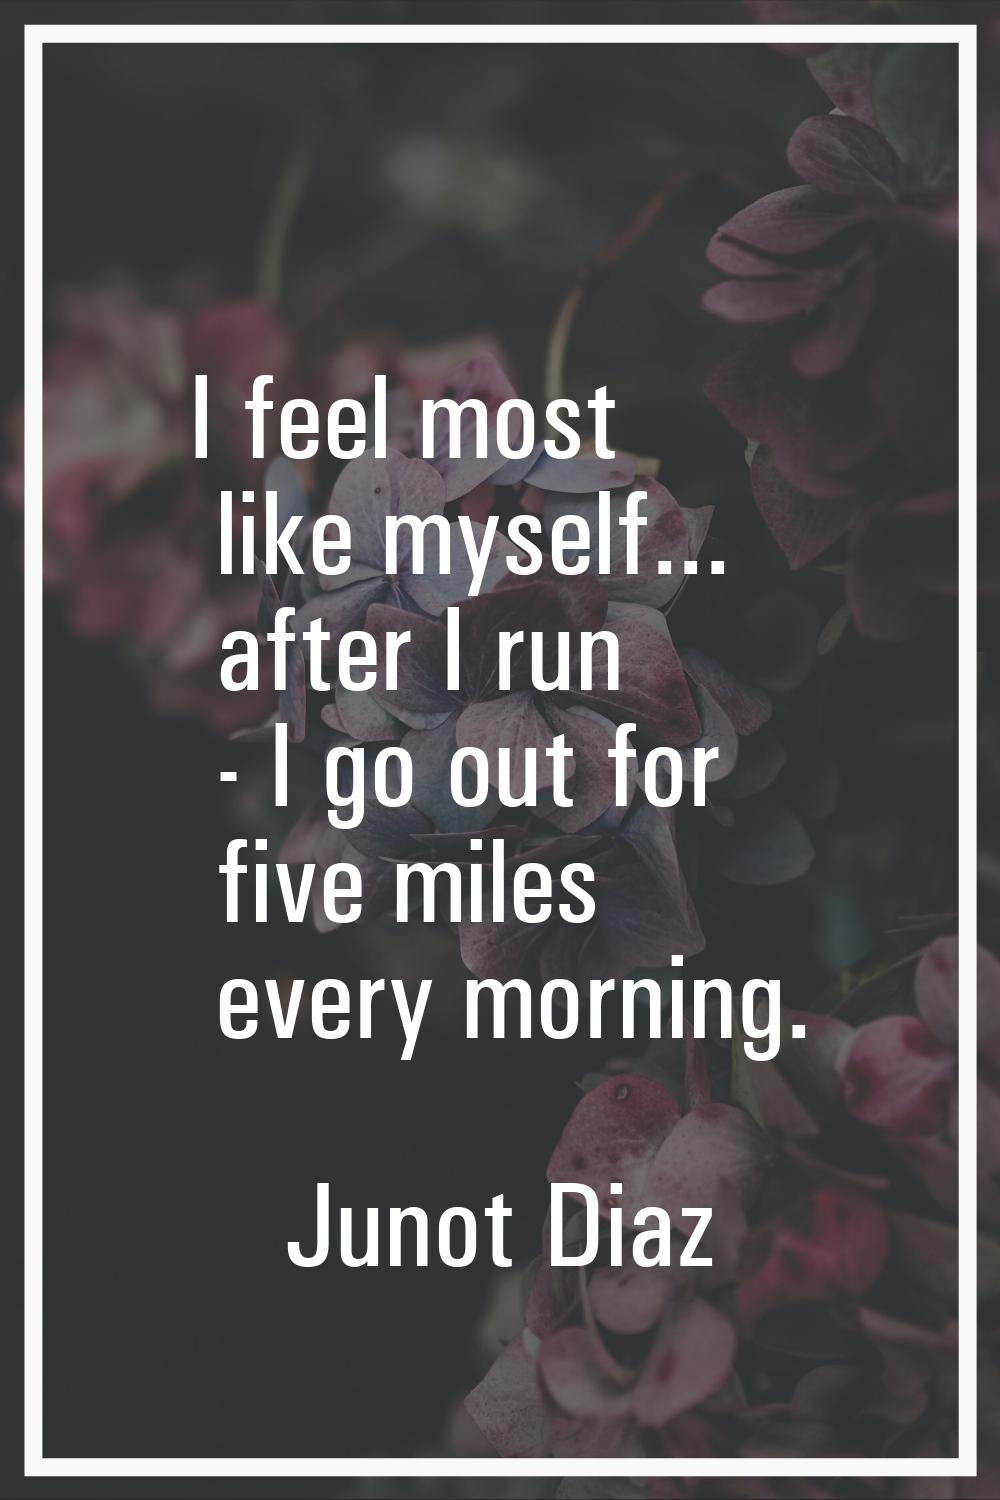 I feel most like myself... after I run - I go out for five miles every morning.